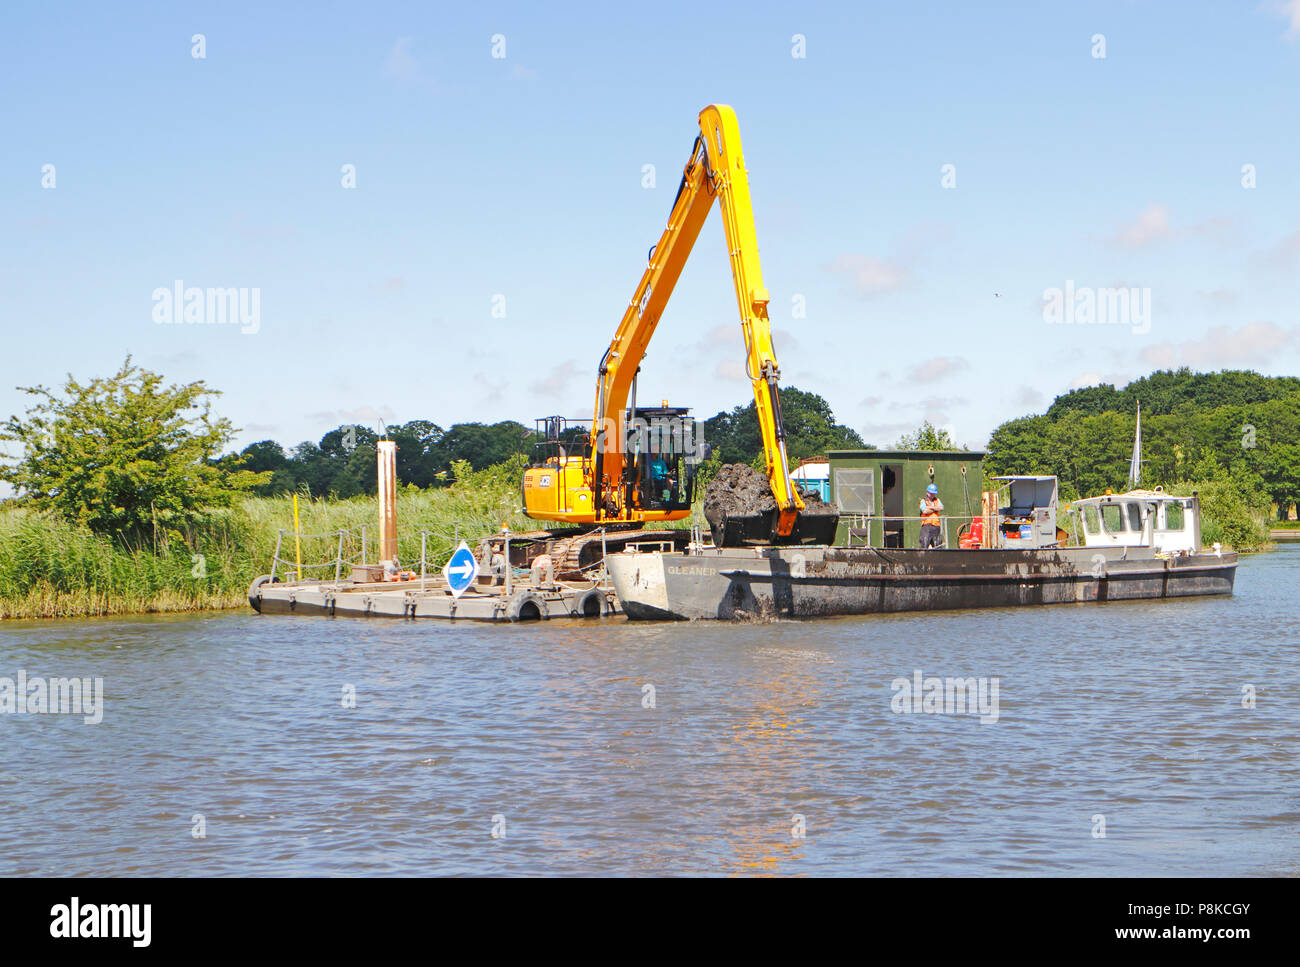 Dredging and loading barge on the River Bure on the Norfolk Broads near Horning, Norfolk, England, United Kingdom, Europe. Stock Photo